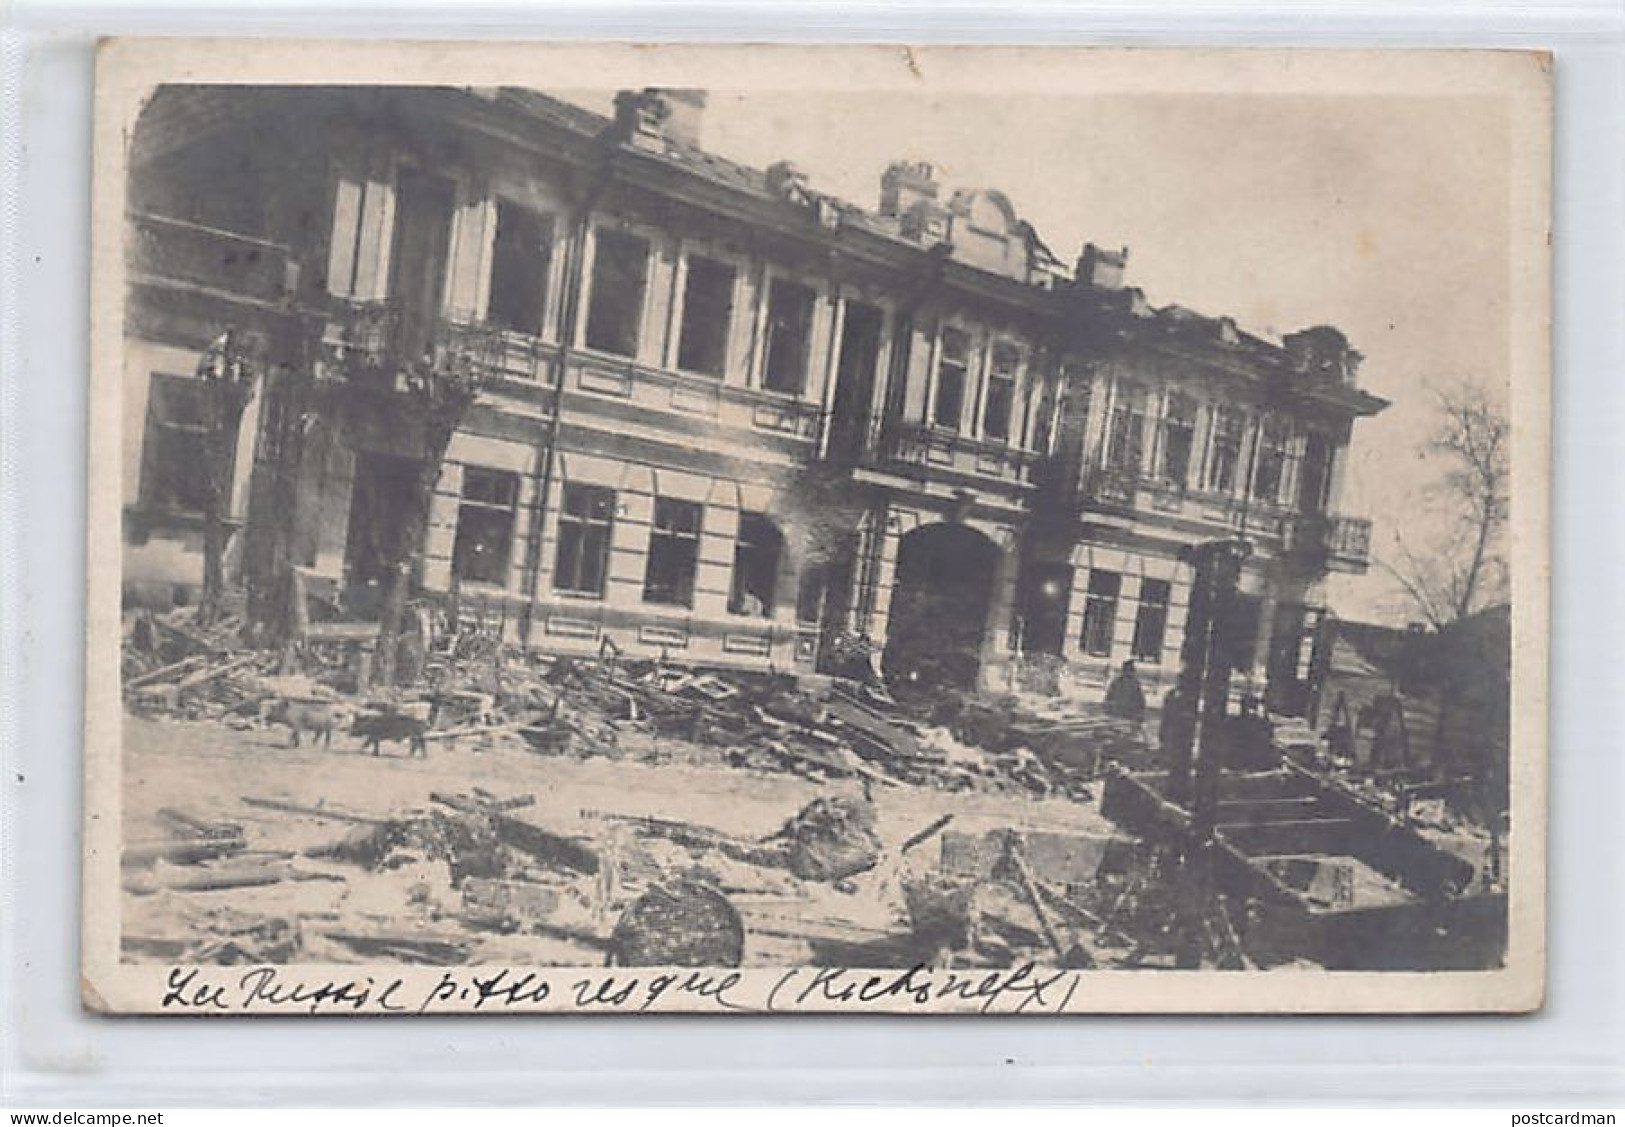 JUDAICA - Moldova - Kishinev Pogrom (April 1903) - Aspect Of The Main Street After The Riot - Part Of The 3 Postcards Se - Judaisme